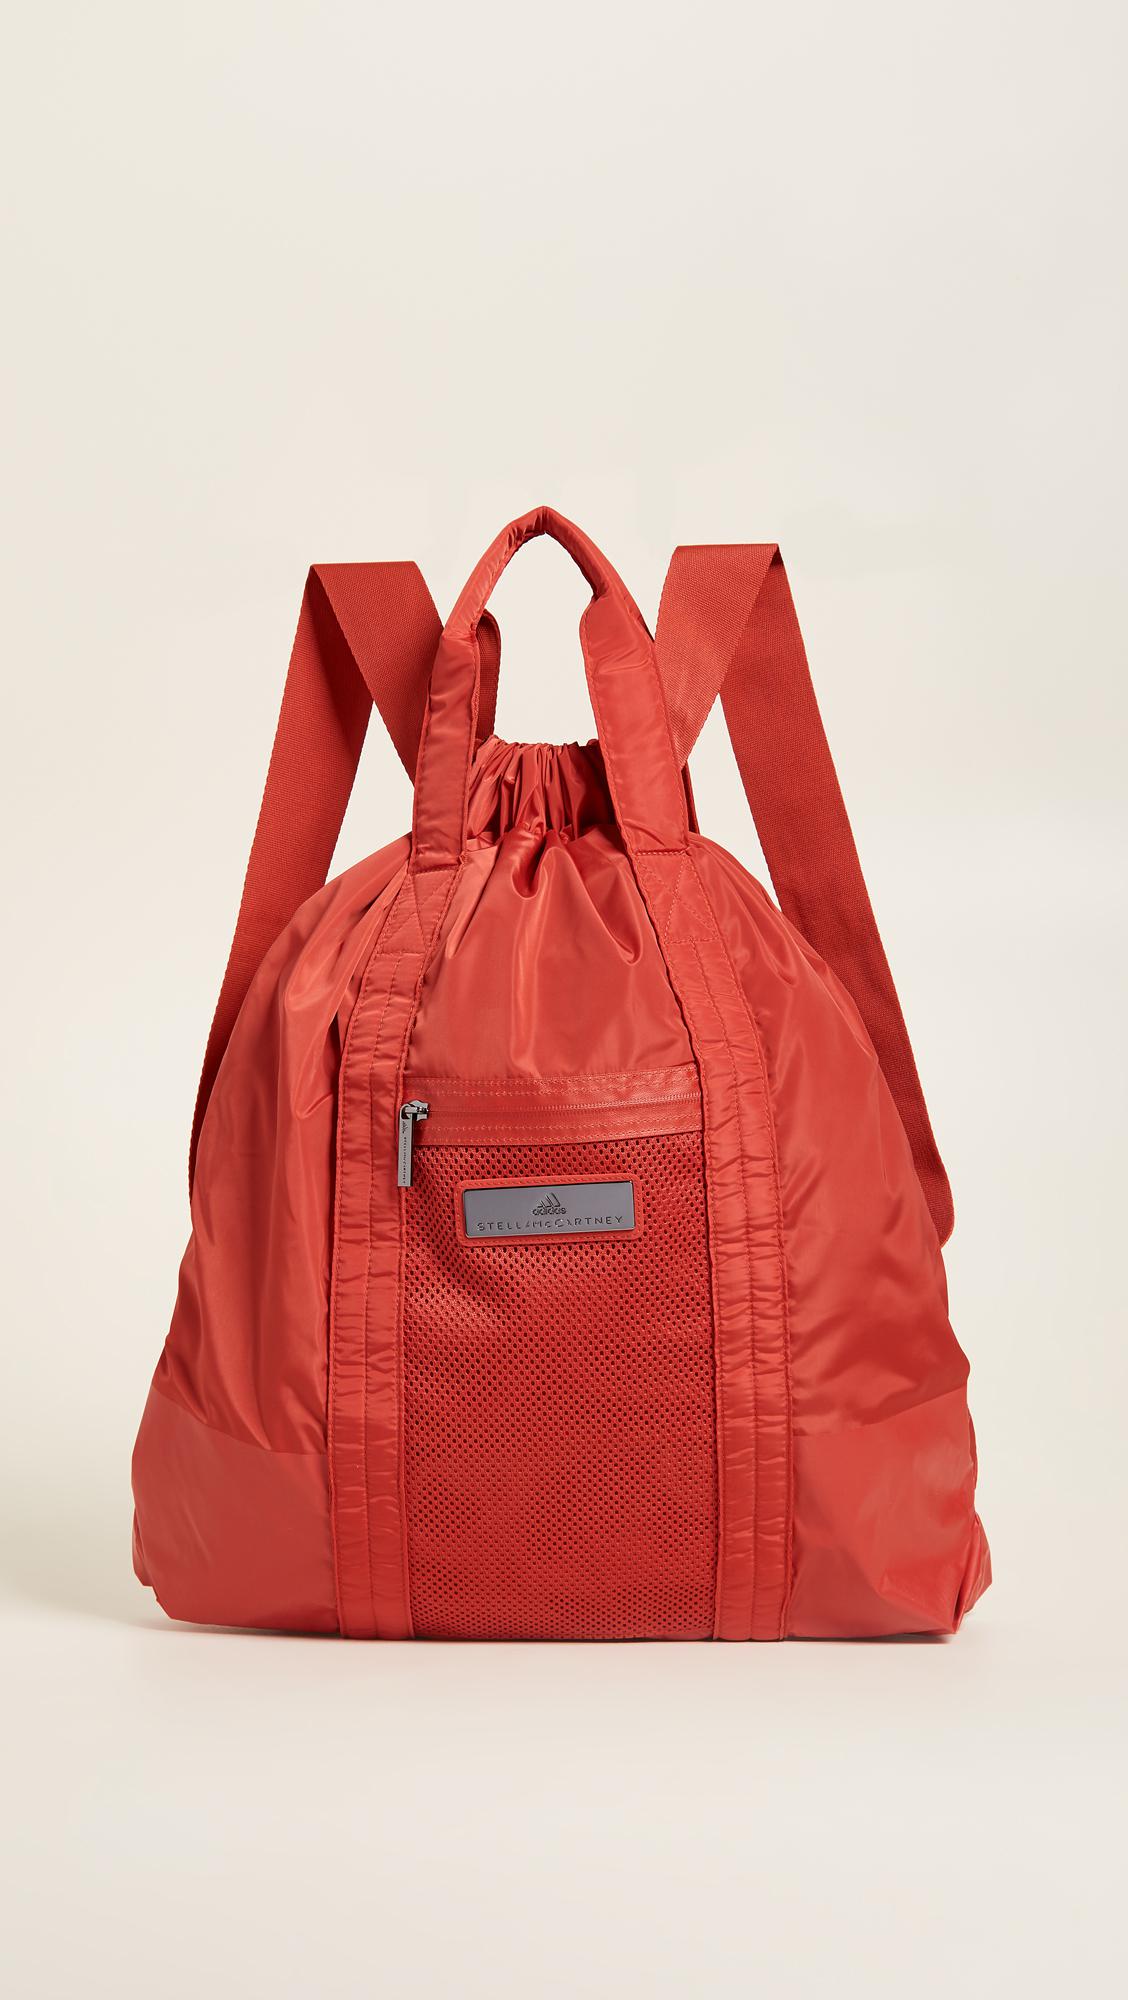 adidas By Stella McCartney Gym Sack Backpack in Red | Lyst